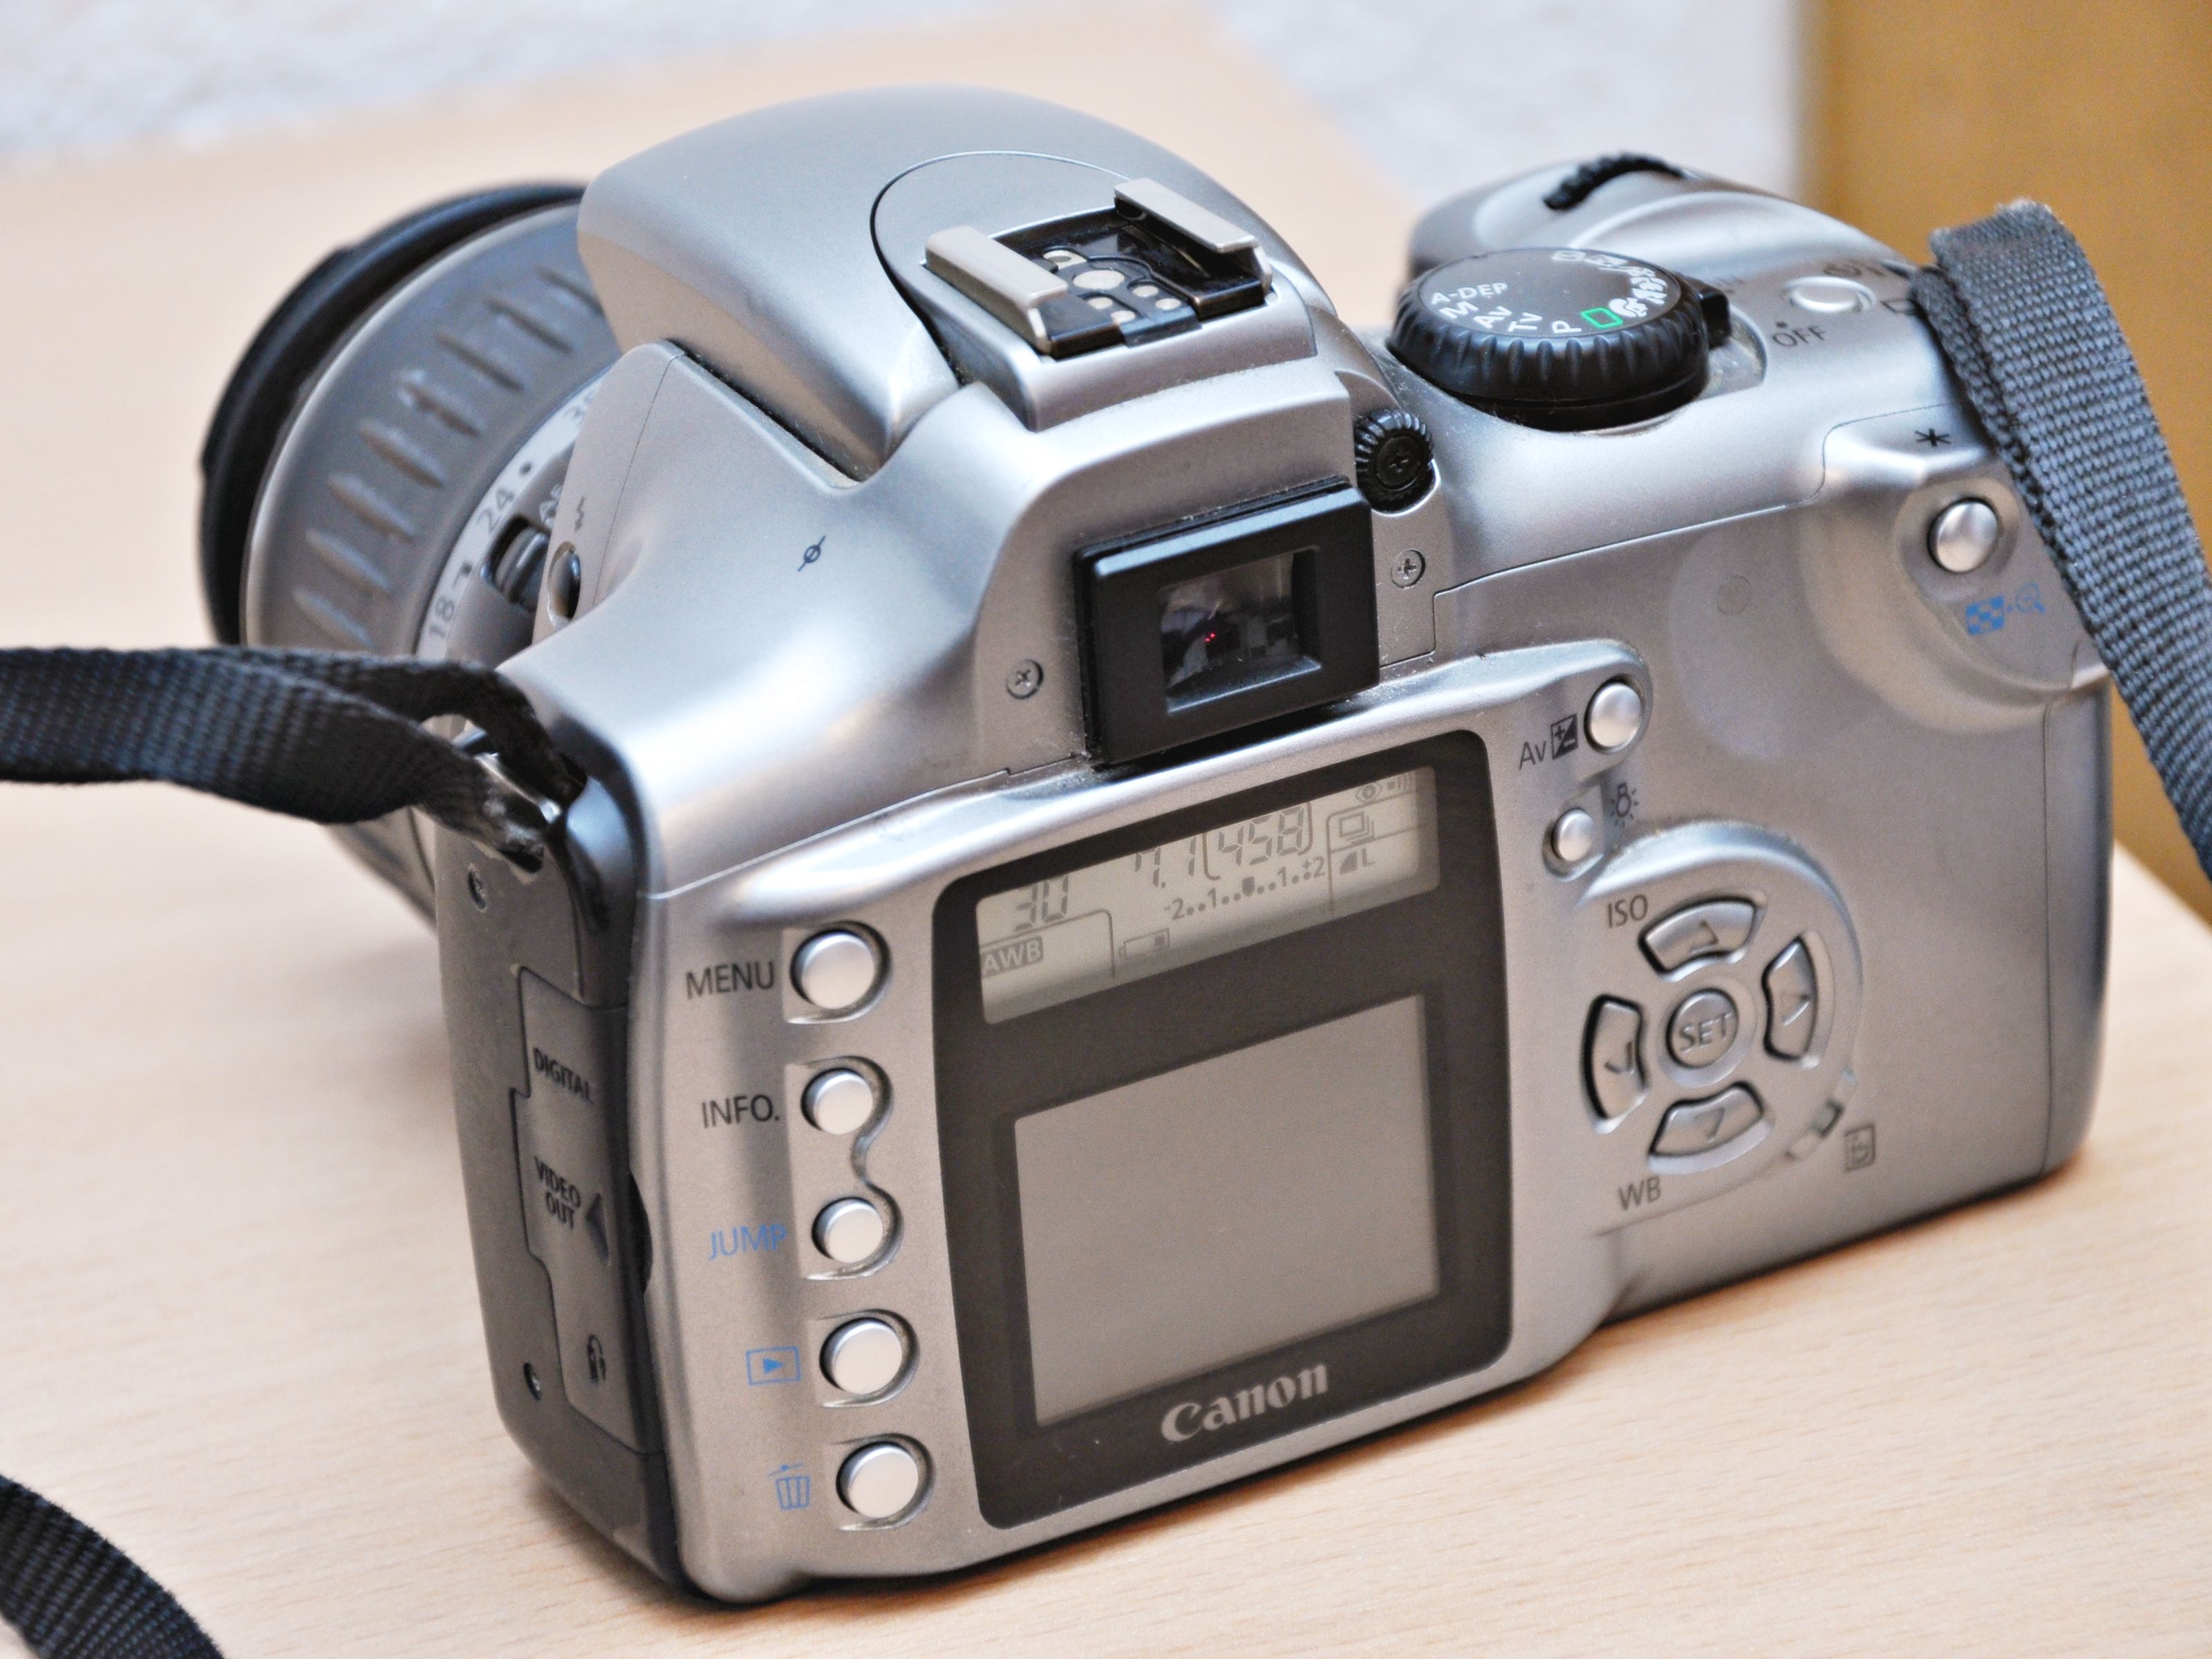 How to Turn a Digital Camera Into an Old Film Camera: 10 Steps